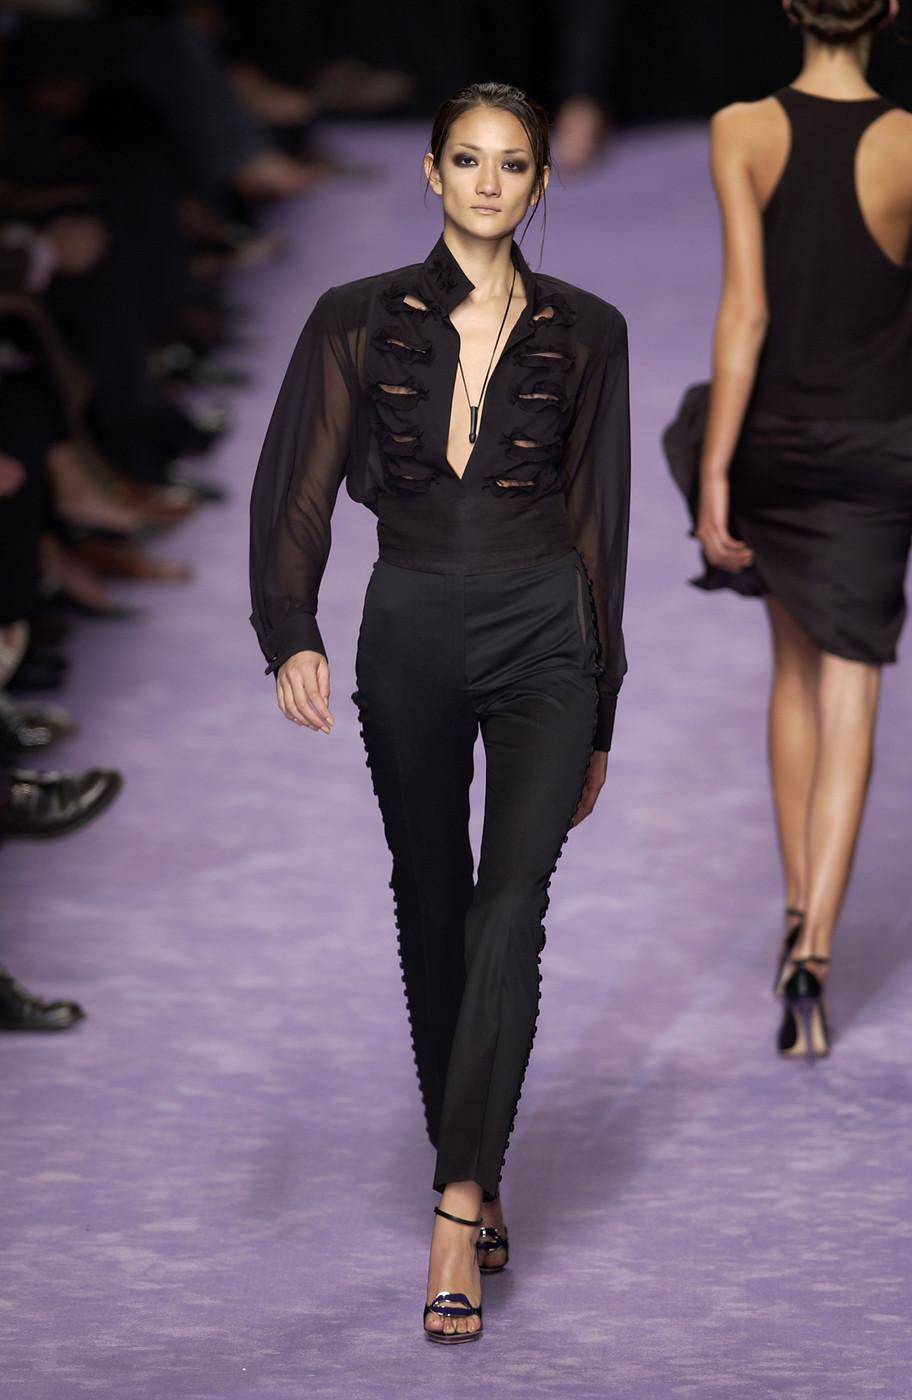 Tom Ford for Yves Saint Laurent Rive Gauche Black Silk Top Blouse
S/S 2003 Runway Collection 
100% Sheer Silk, Hidden Buttons Closure, Cut-out Details.
Measurements: Length - 28 inches, Bust - 44